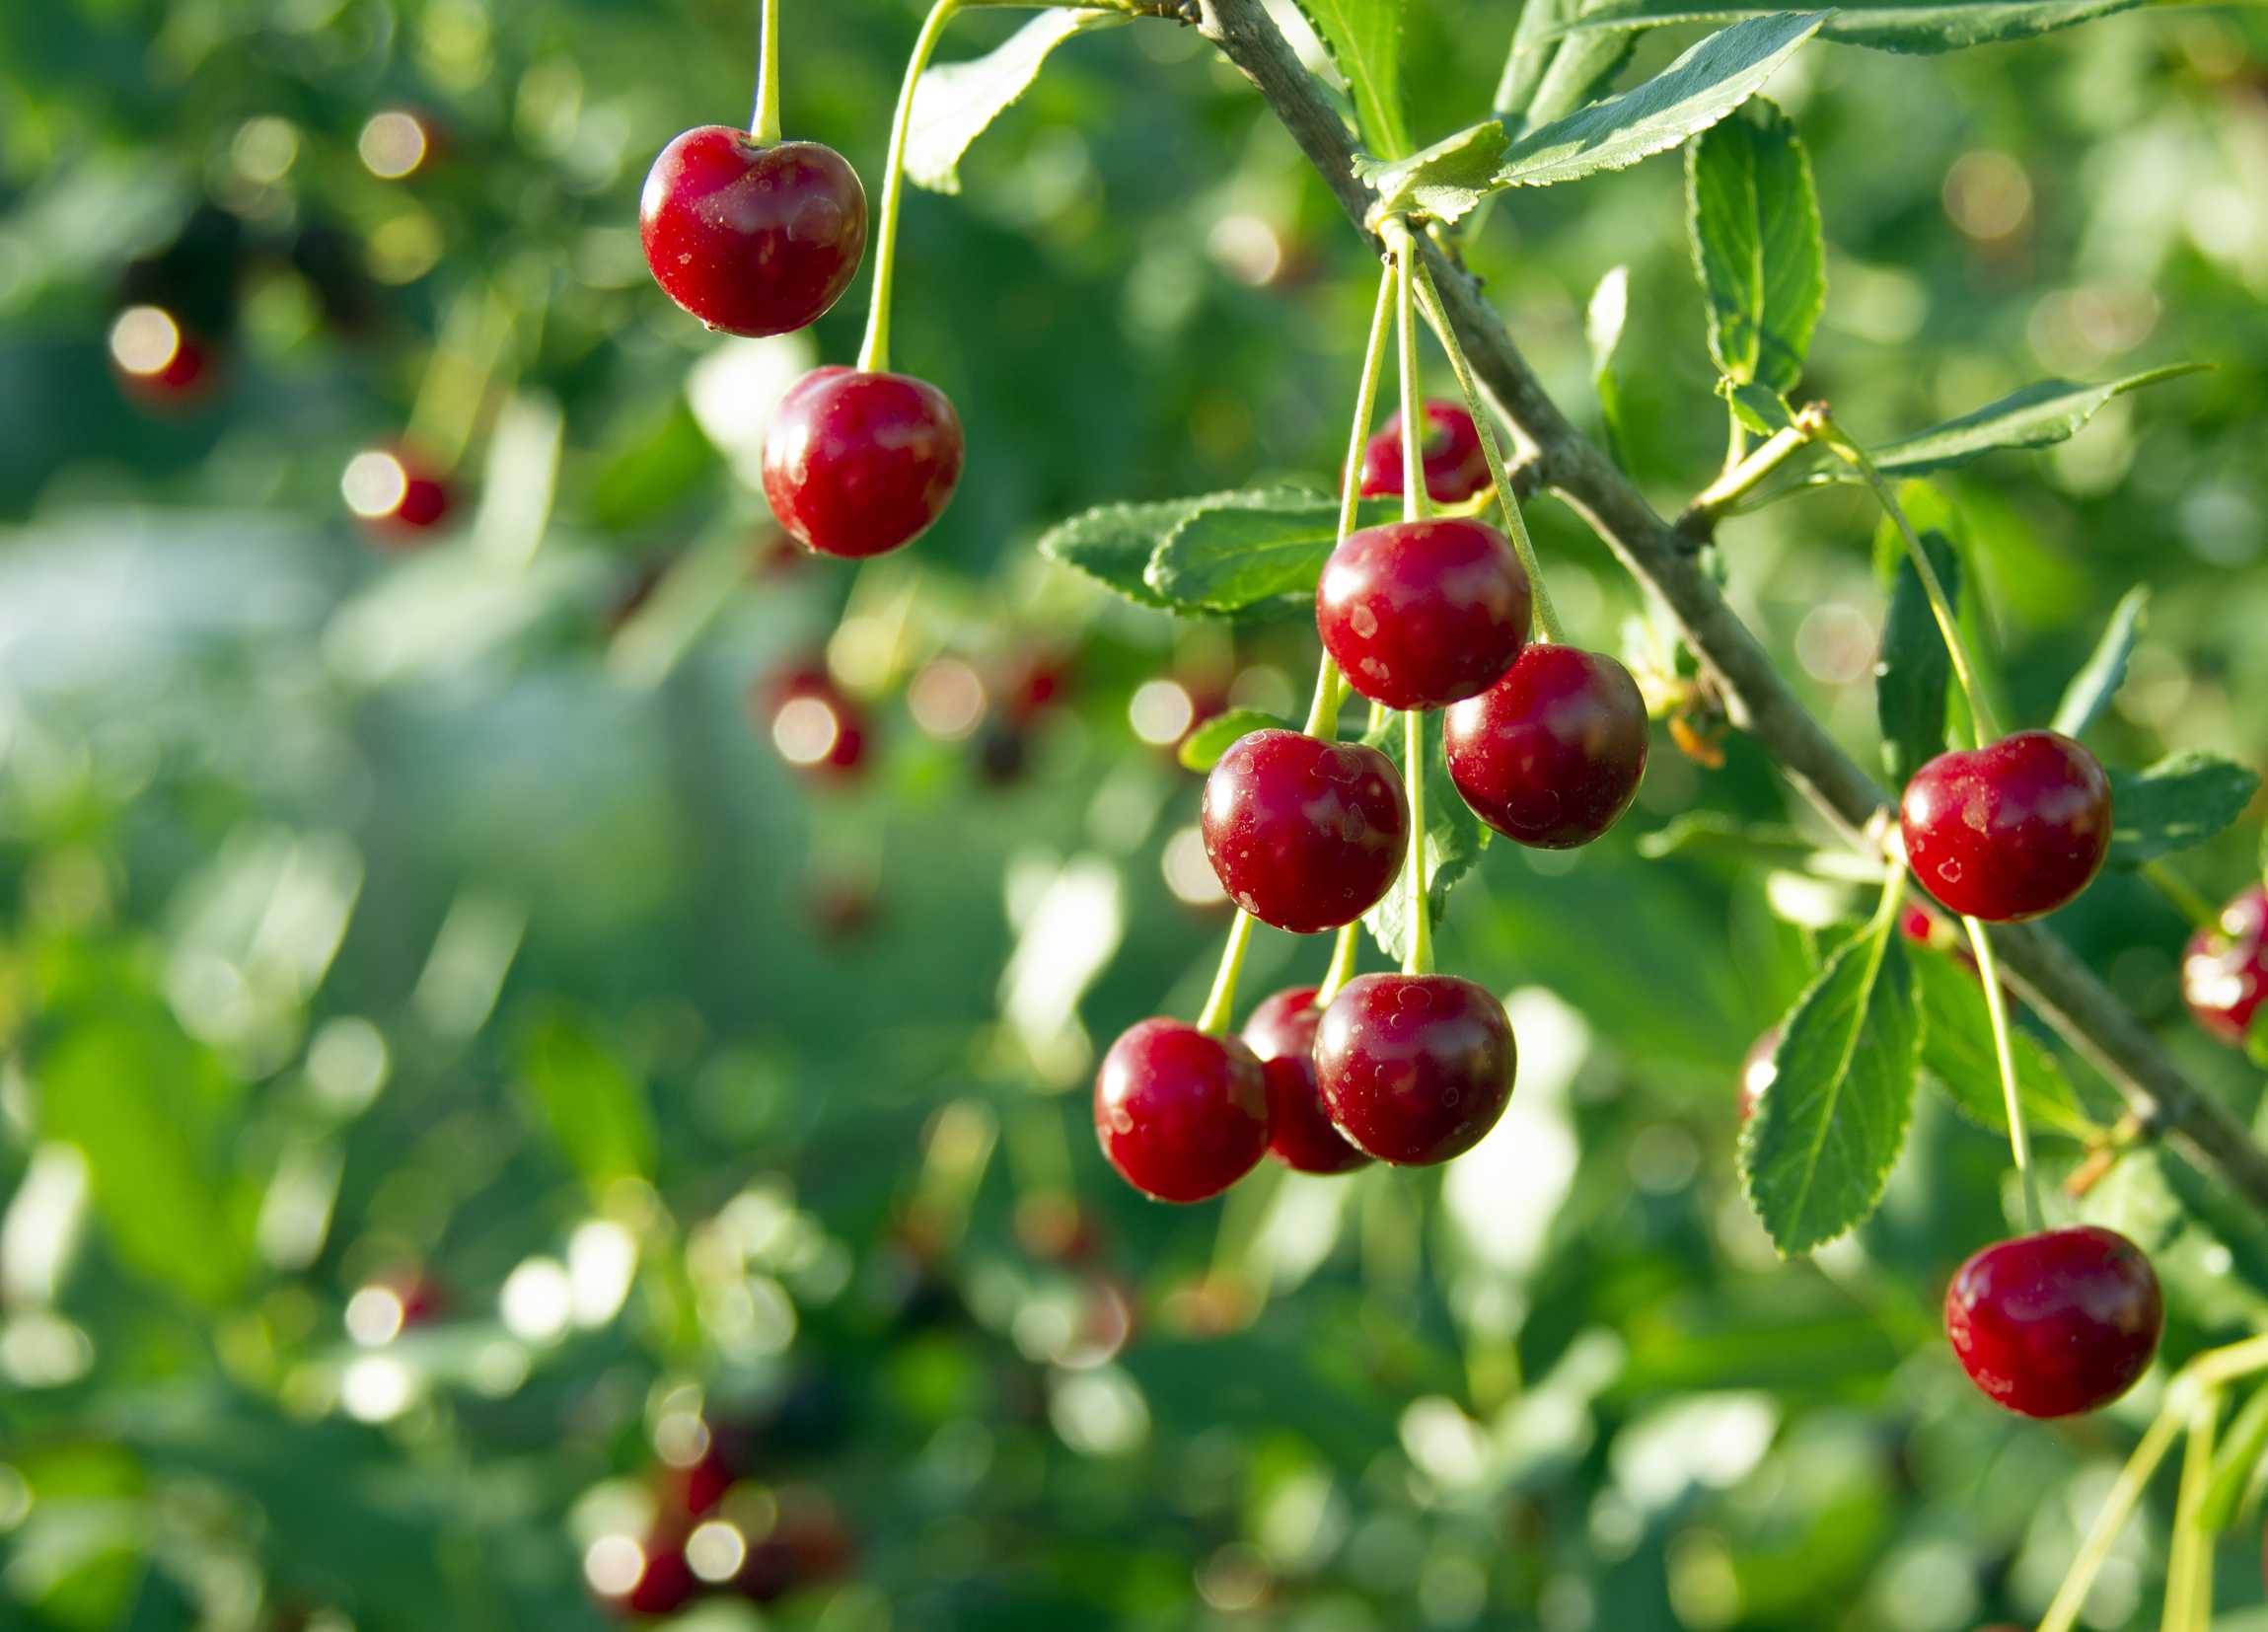 microsoft, cherry superfood: expert nutrition tips for optimal health